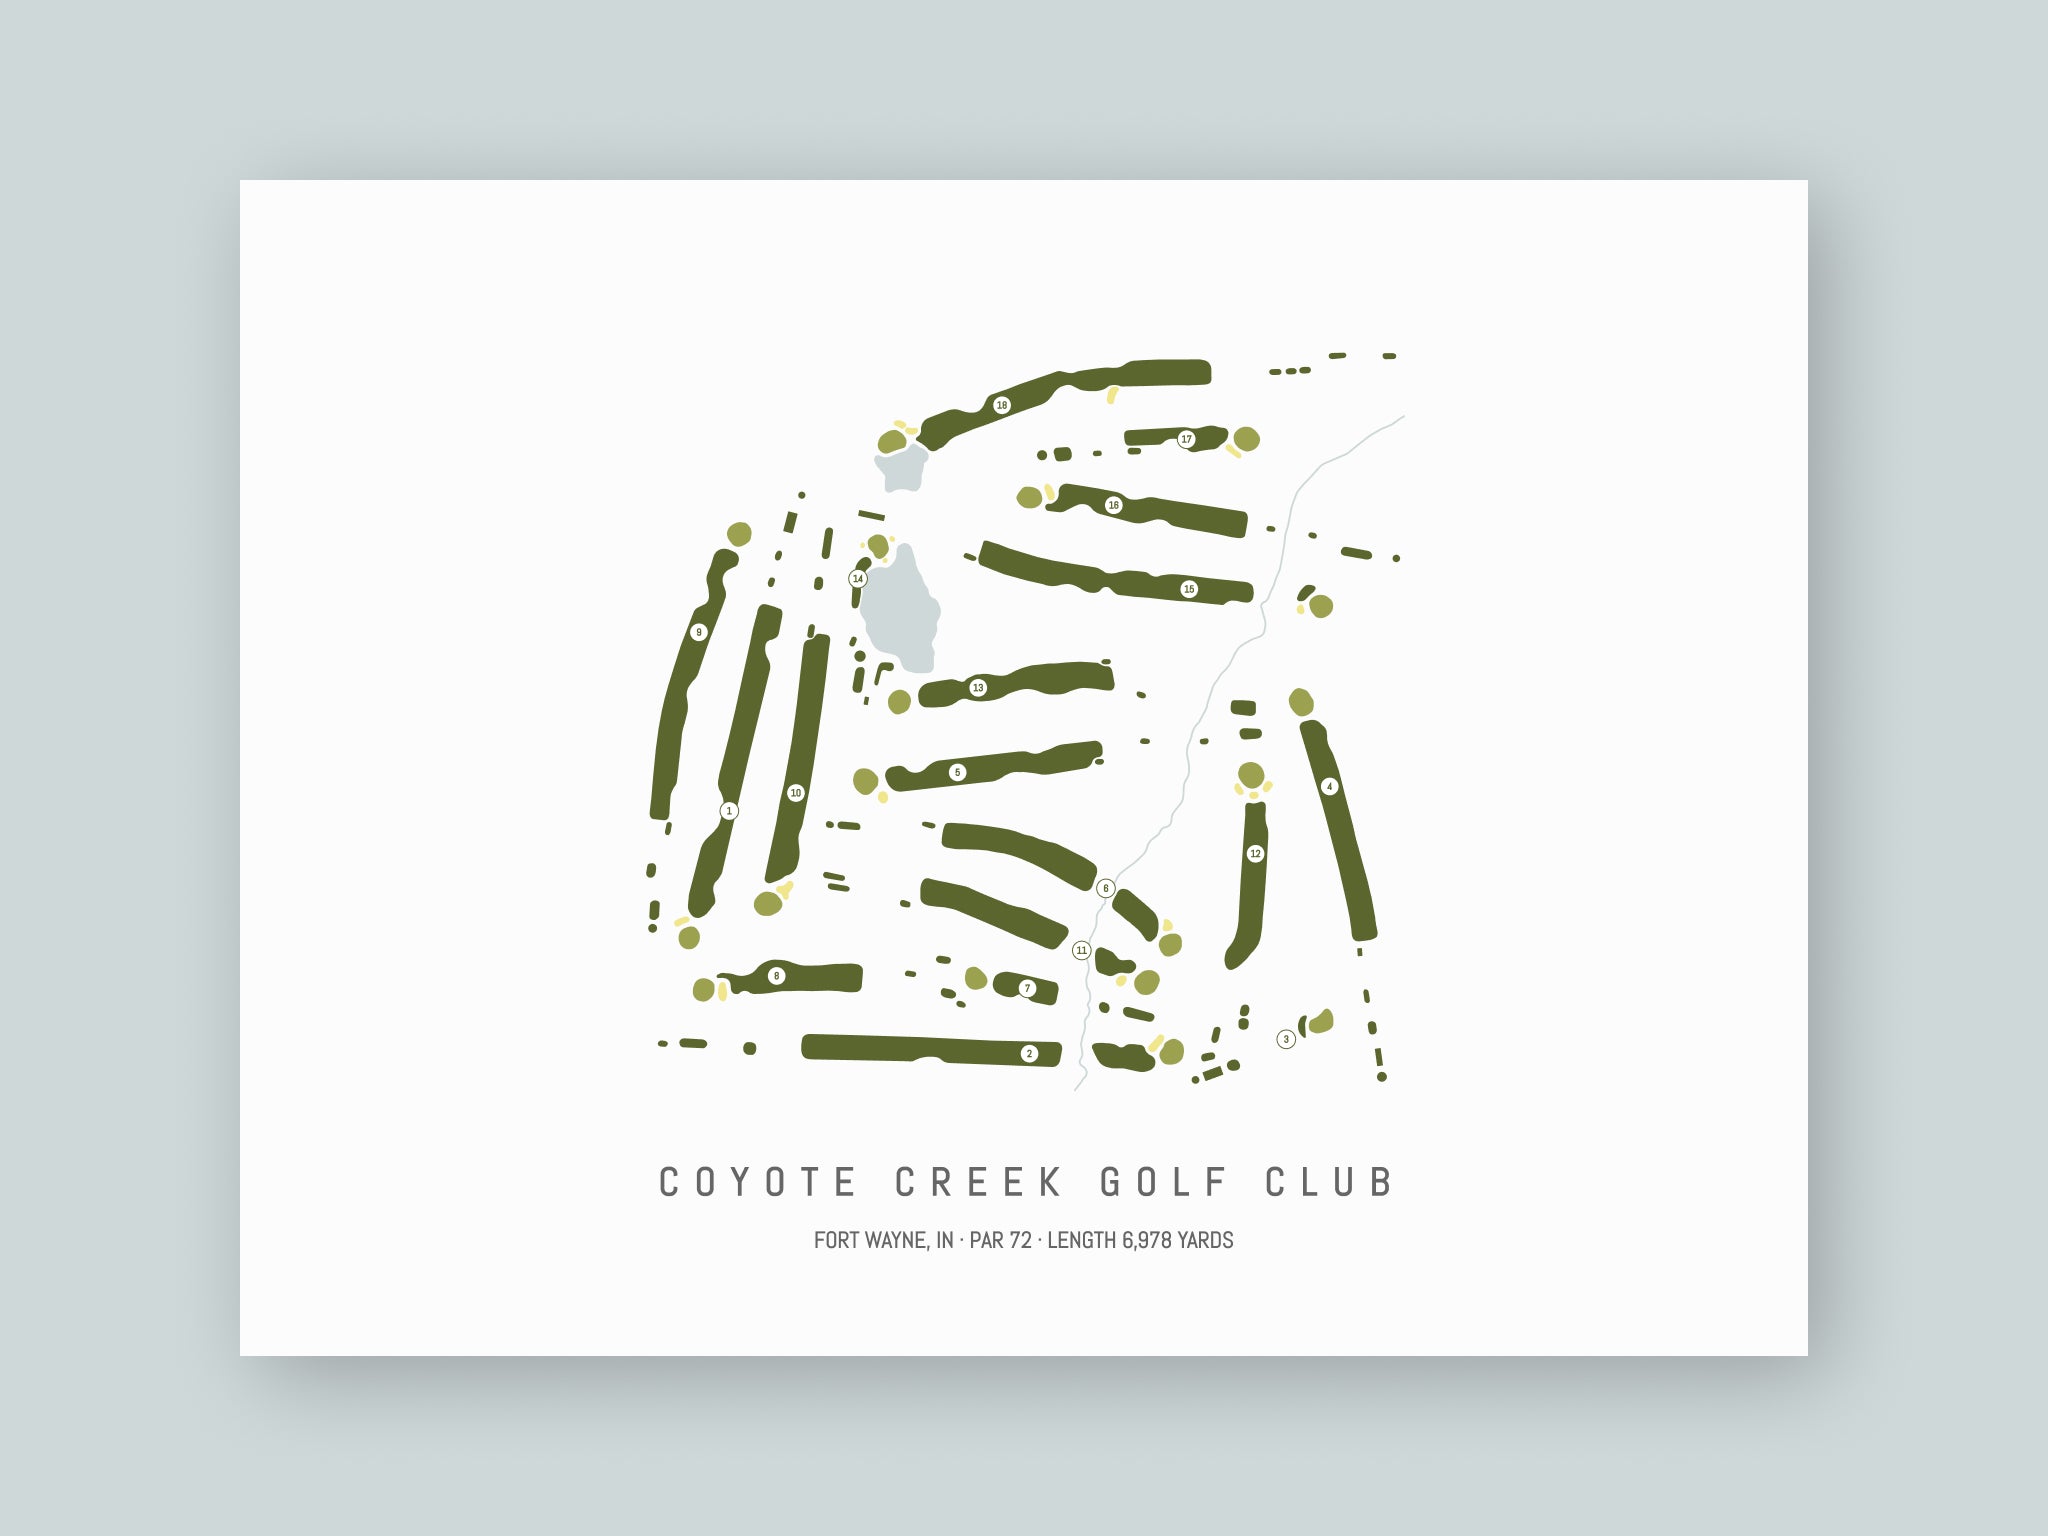 Coyote-Creek-Golf-Club-IN--Unframed-24x18-With-Hole-Numbers